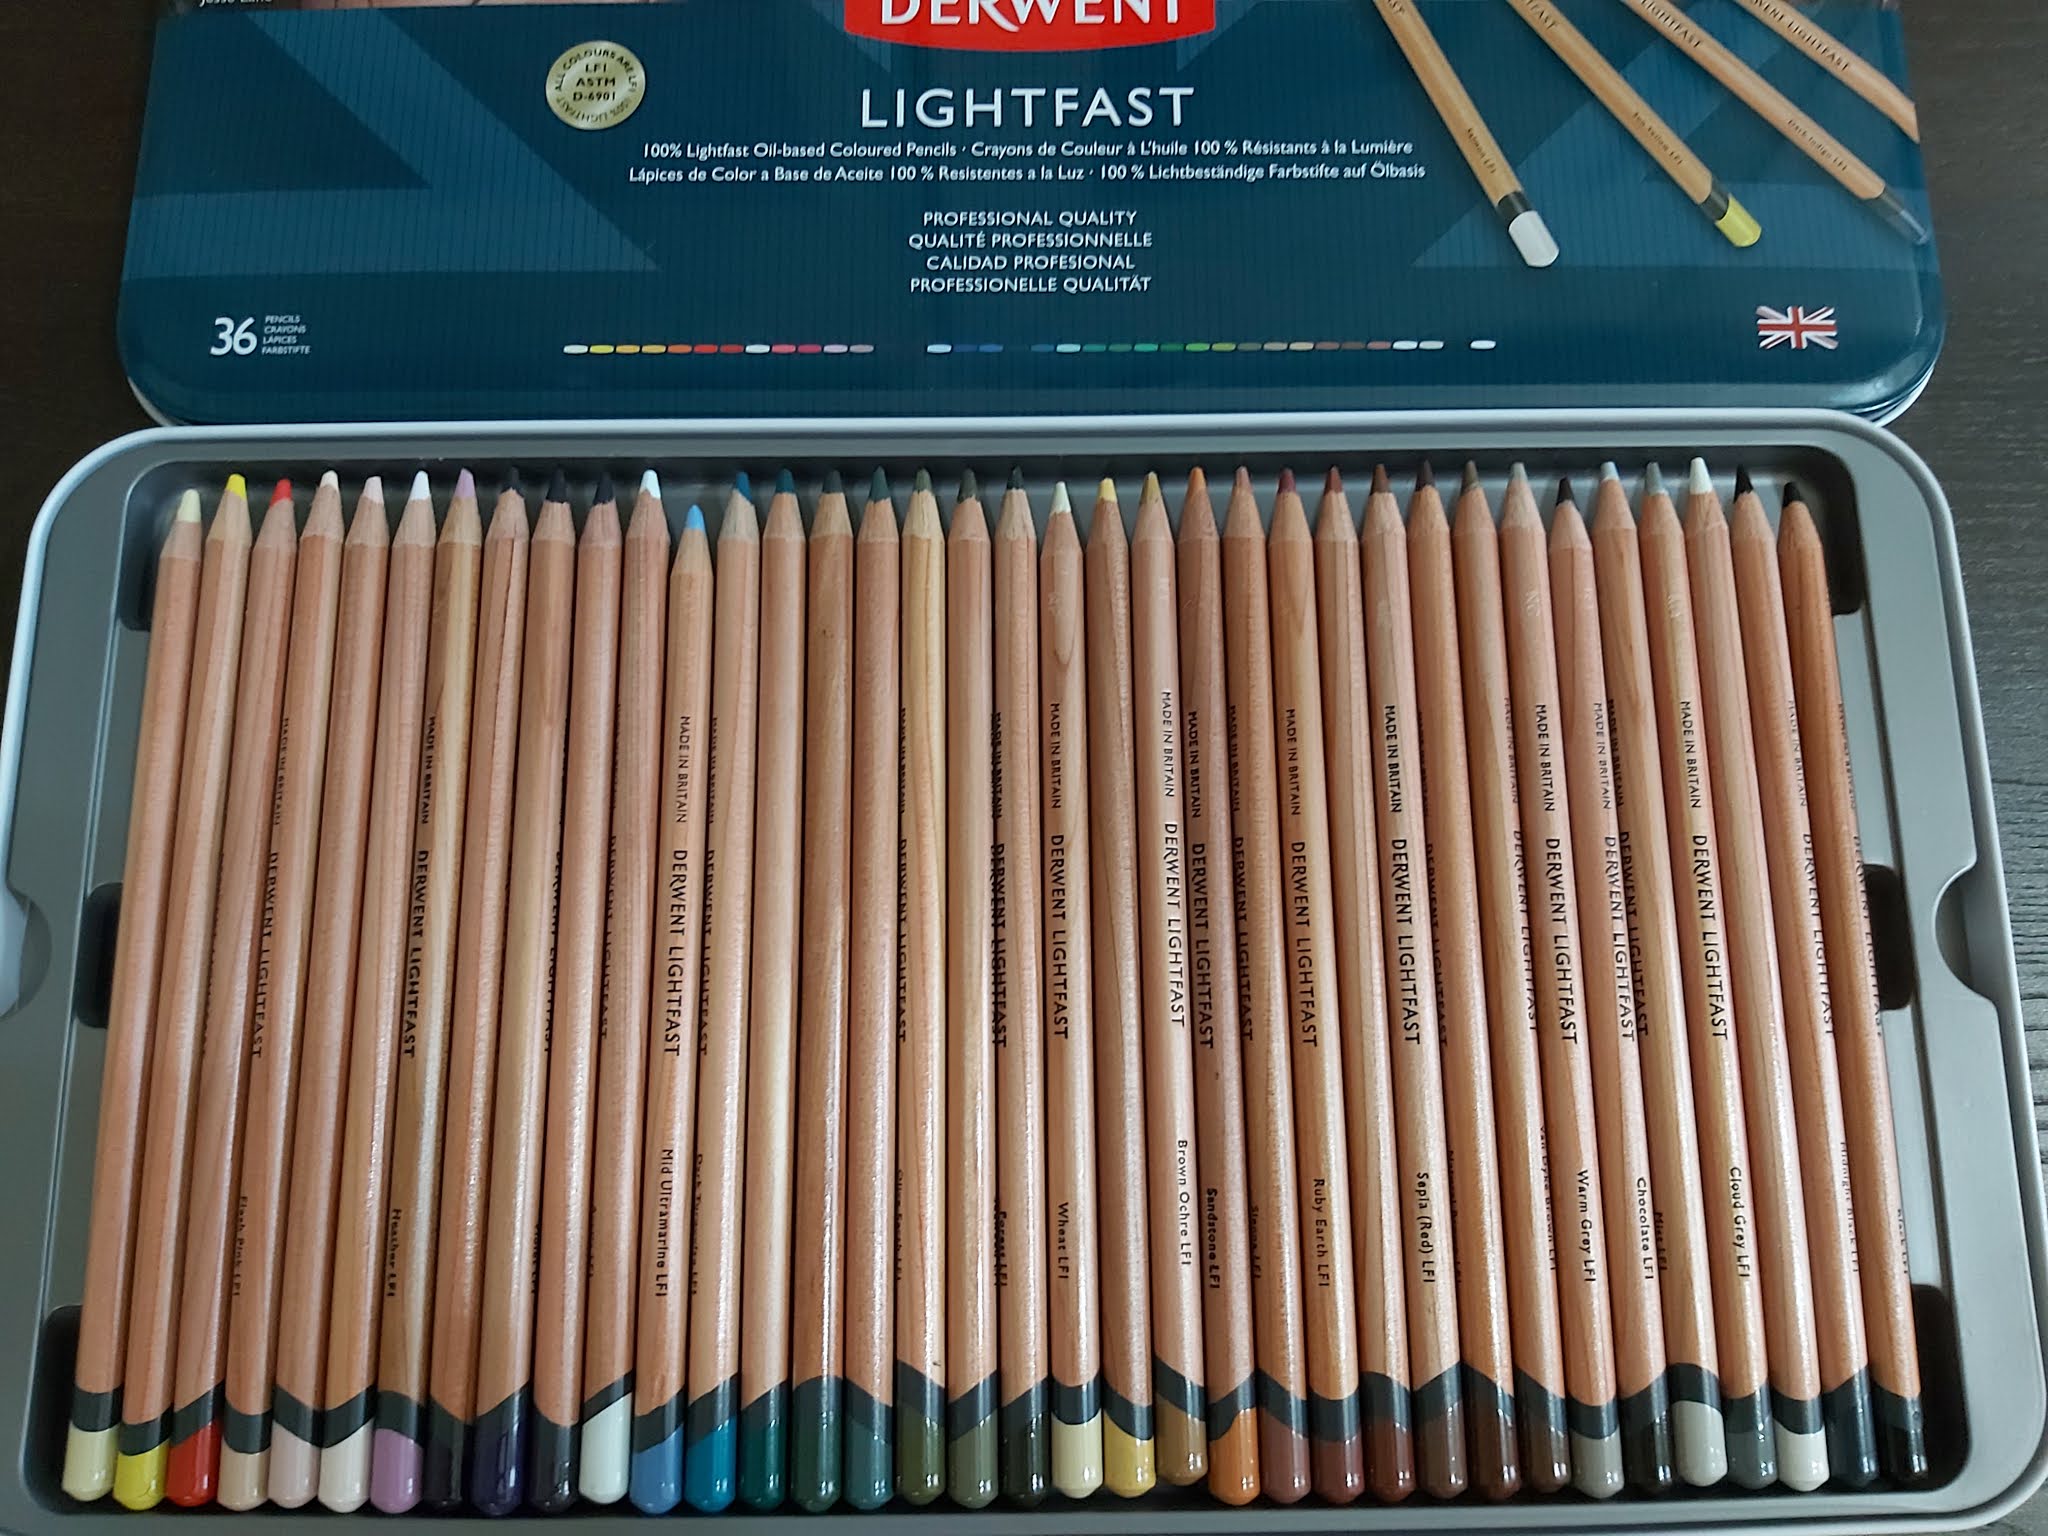 Finally finished swatching my Derwent Lightfast pencils! On to Polychromos!  : r/ColoredPencils